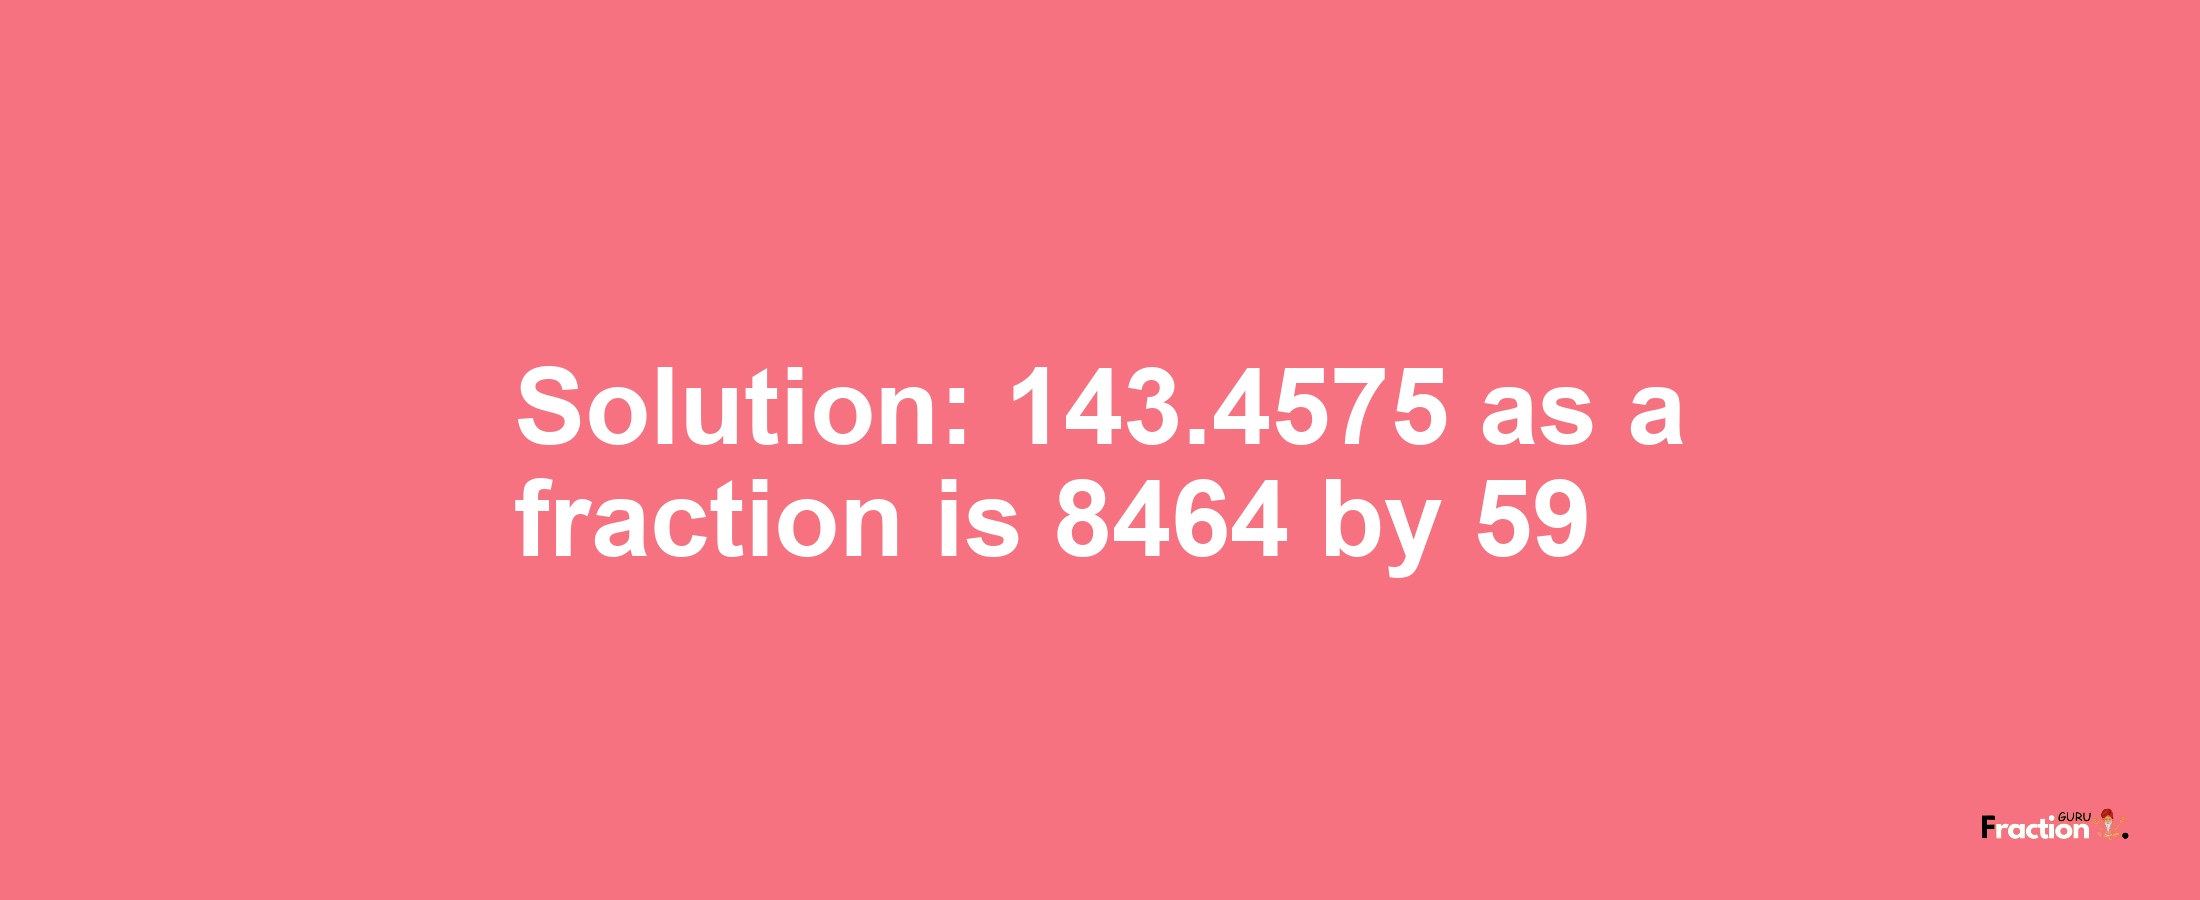 Solution:143.4575 as a fraction is 8464/59